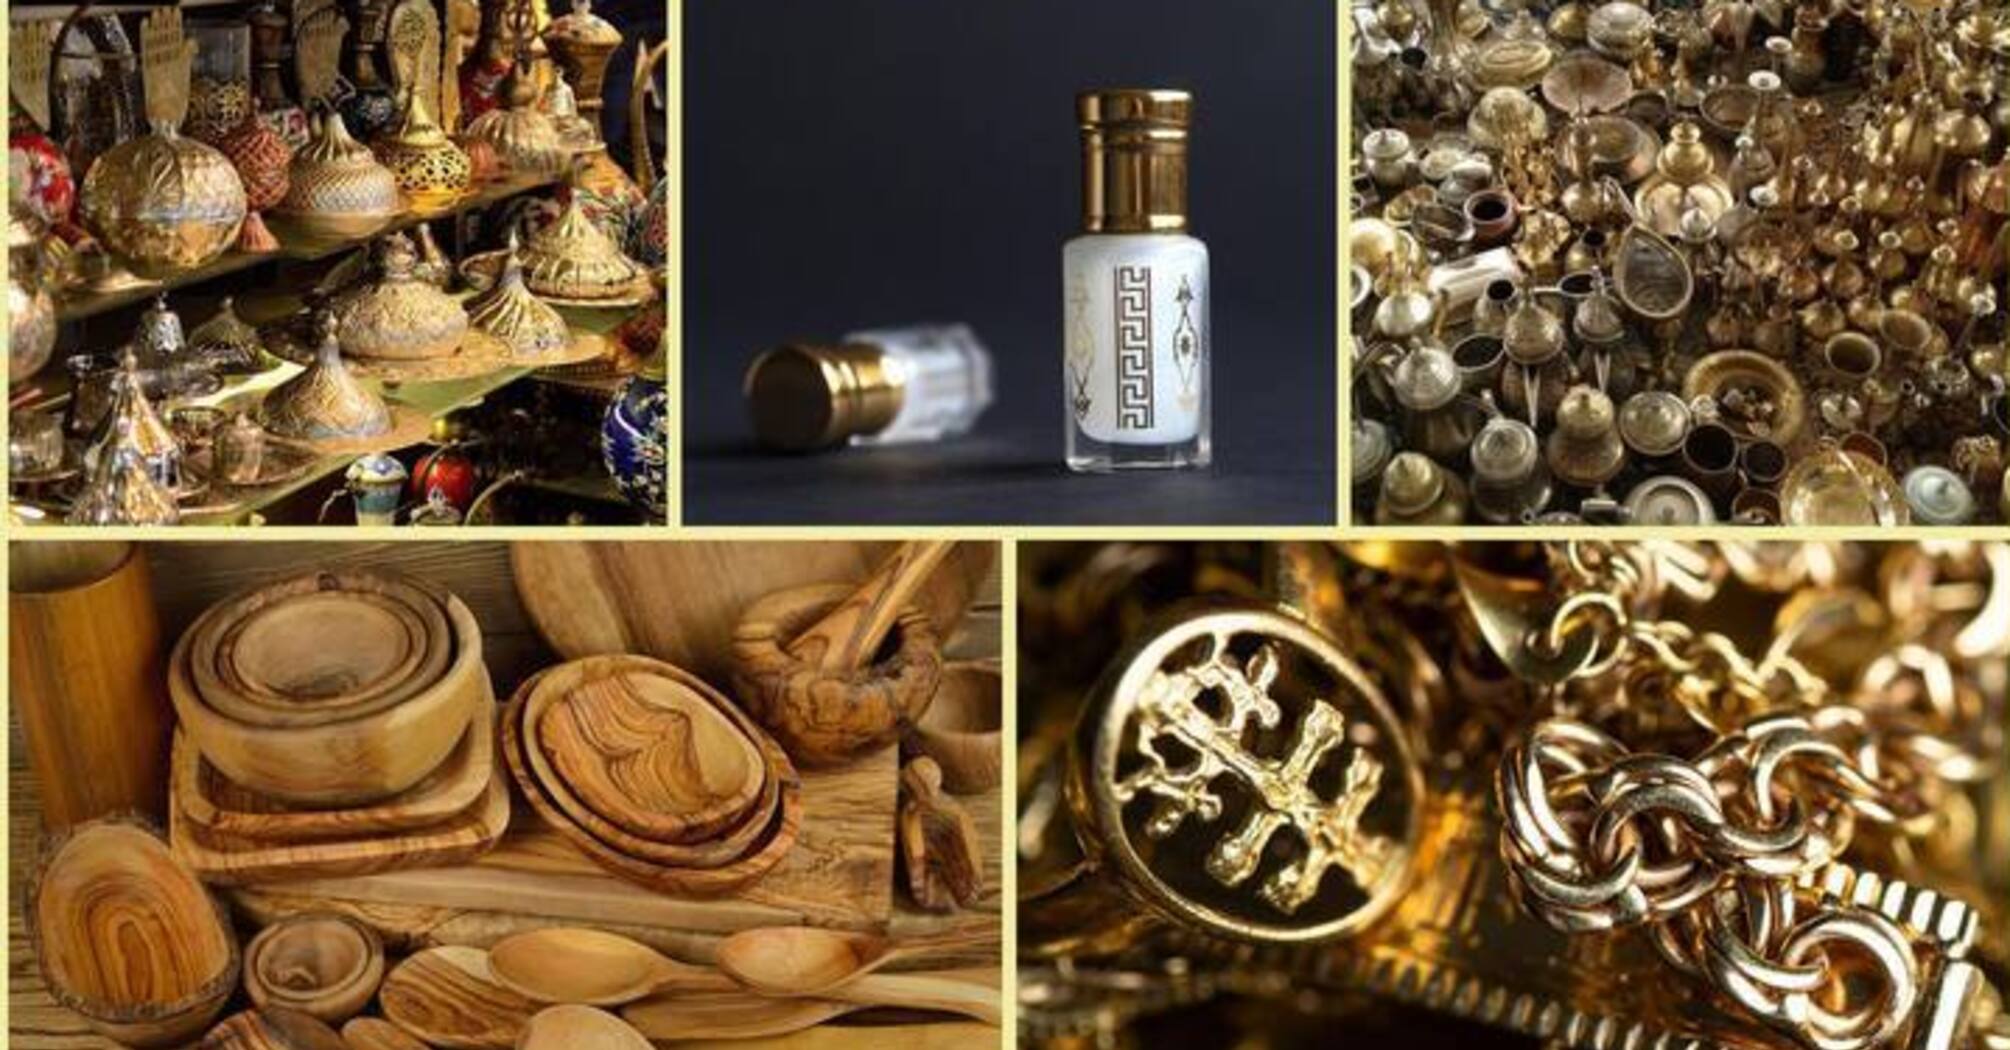 Gold jewelry and perfumes: bring these souvenirs if you're planning a trip to Kuwait